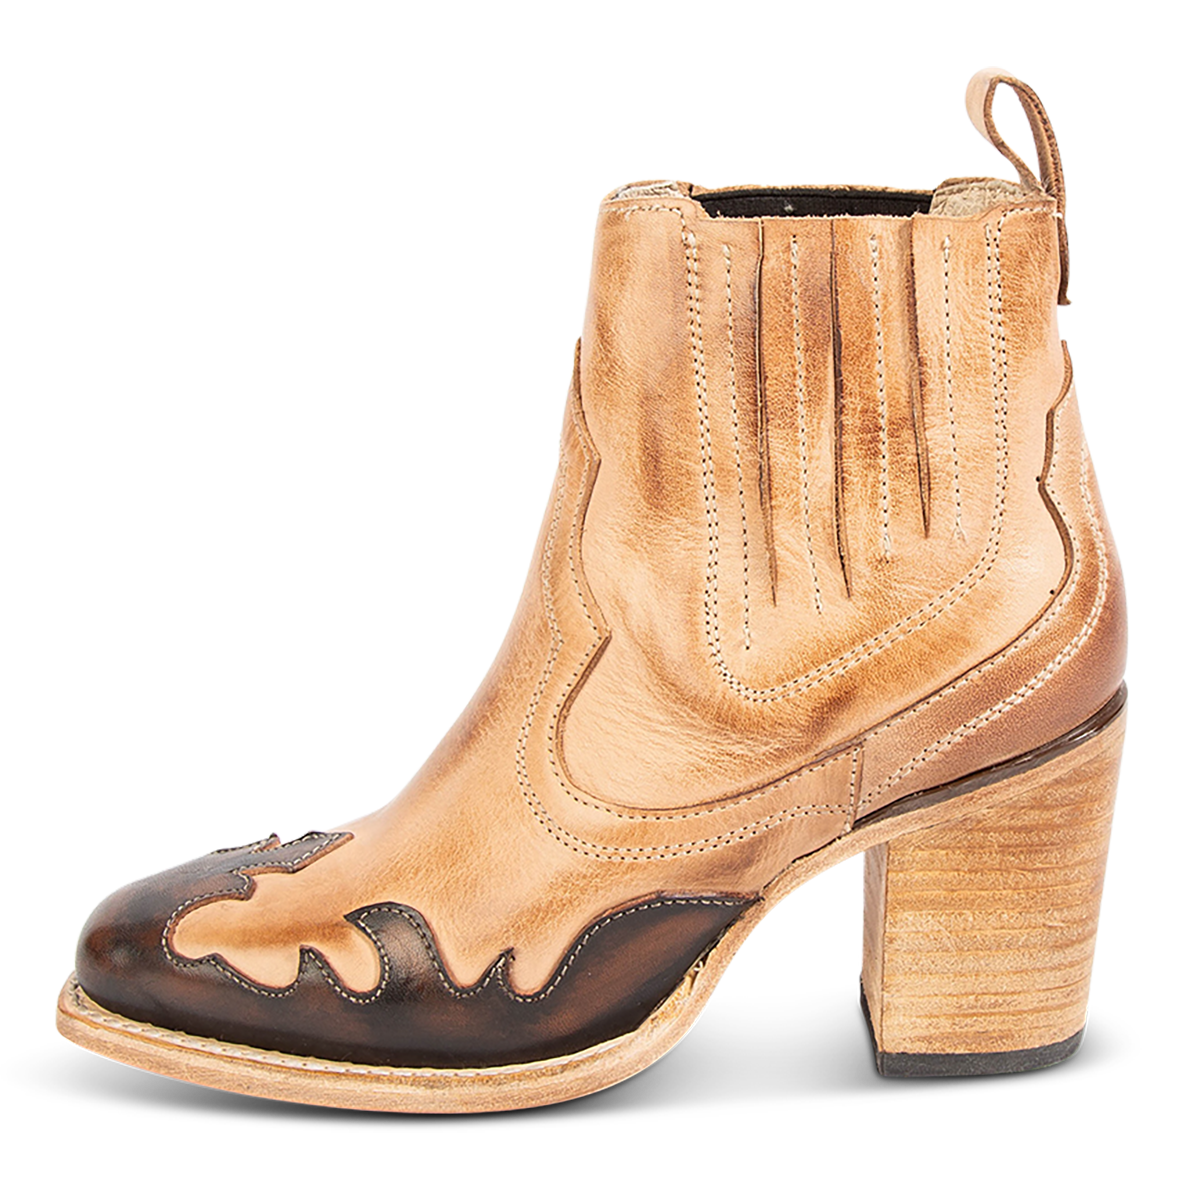 Inside view showing FREEBIRD women's Paula beige multi contrast leather overlay bootie with gore detailing, stacked heel and heel leather pull tab